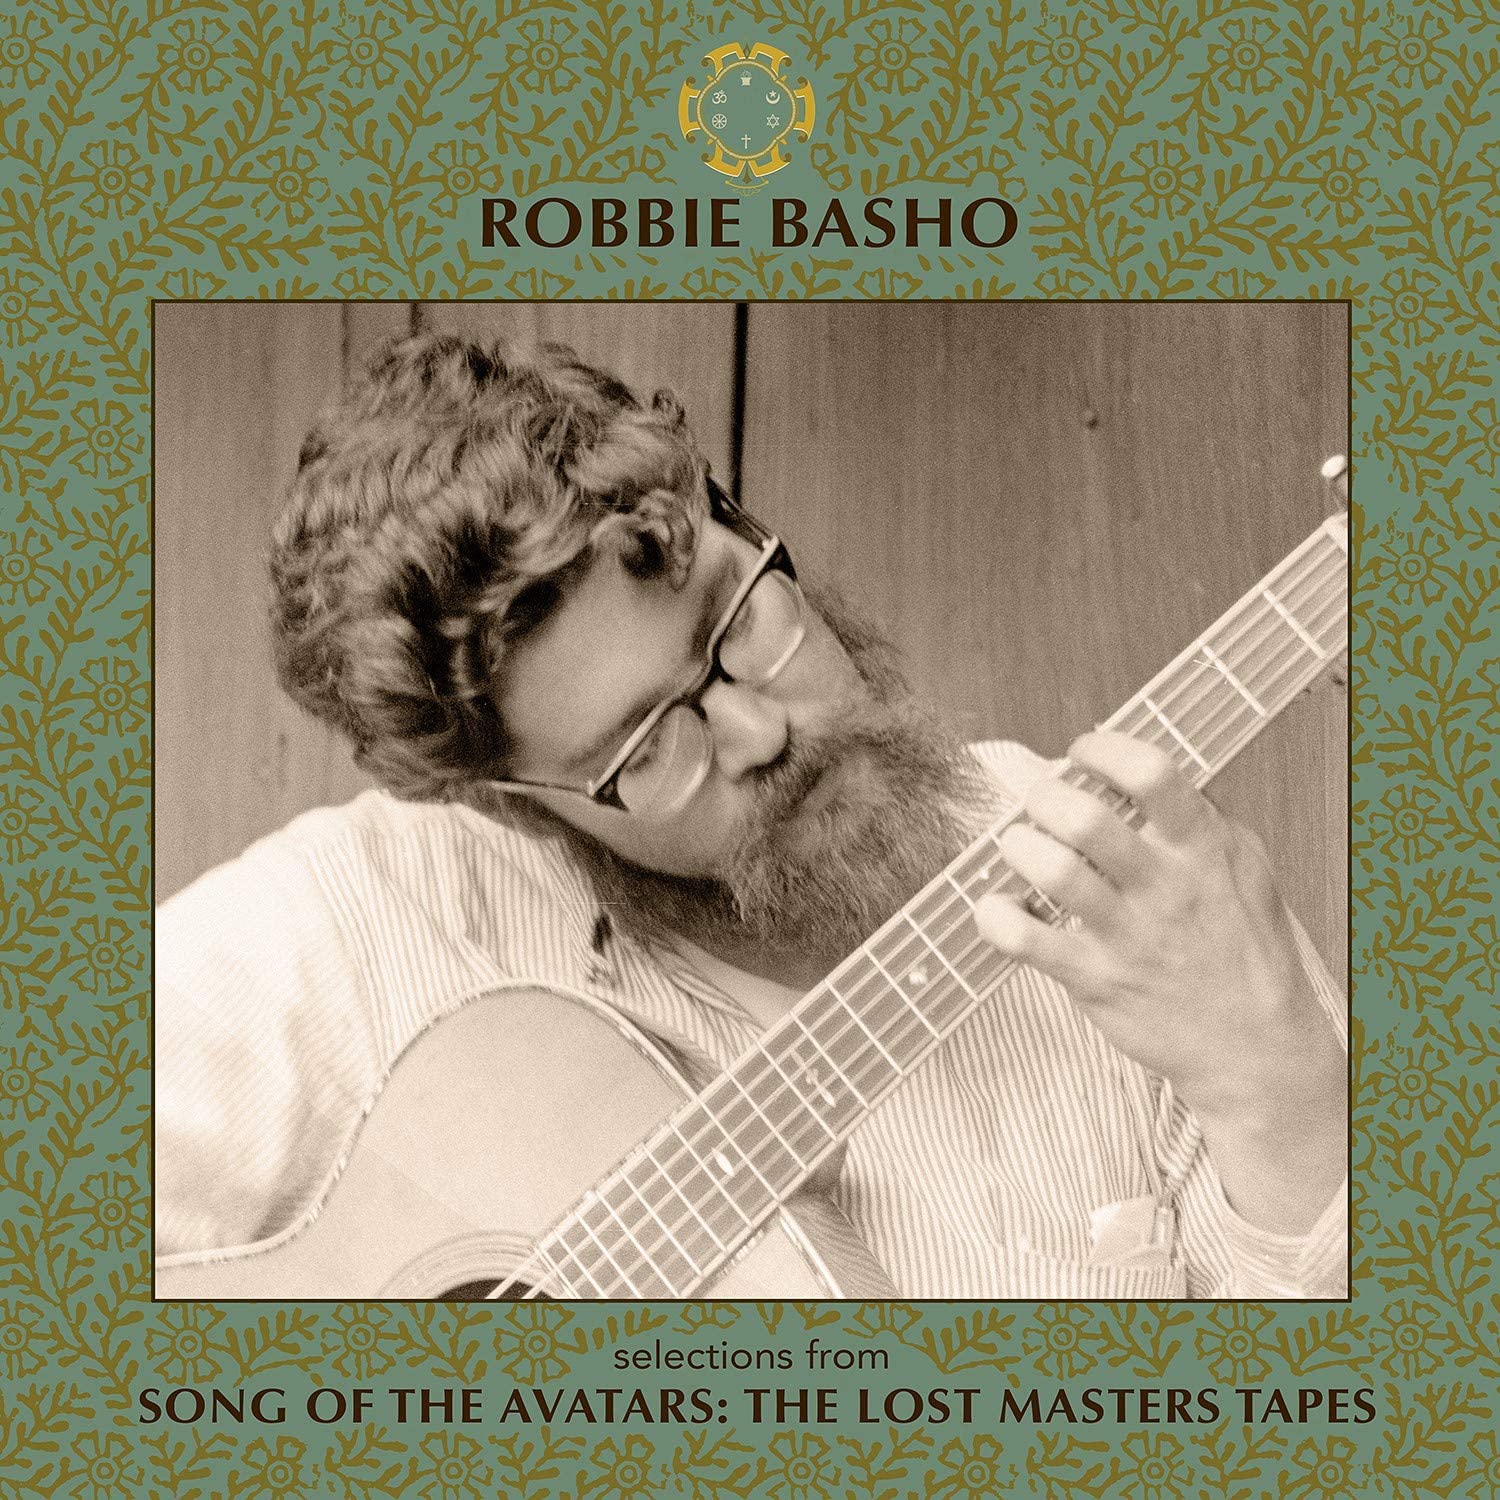 ROBBIE BASHO - Selections from Song of the Avatars : The Lost Master Tapes - LP - Vinyl [RSD2020-SEPT26]